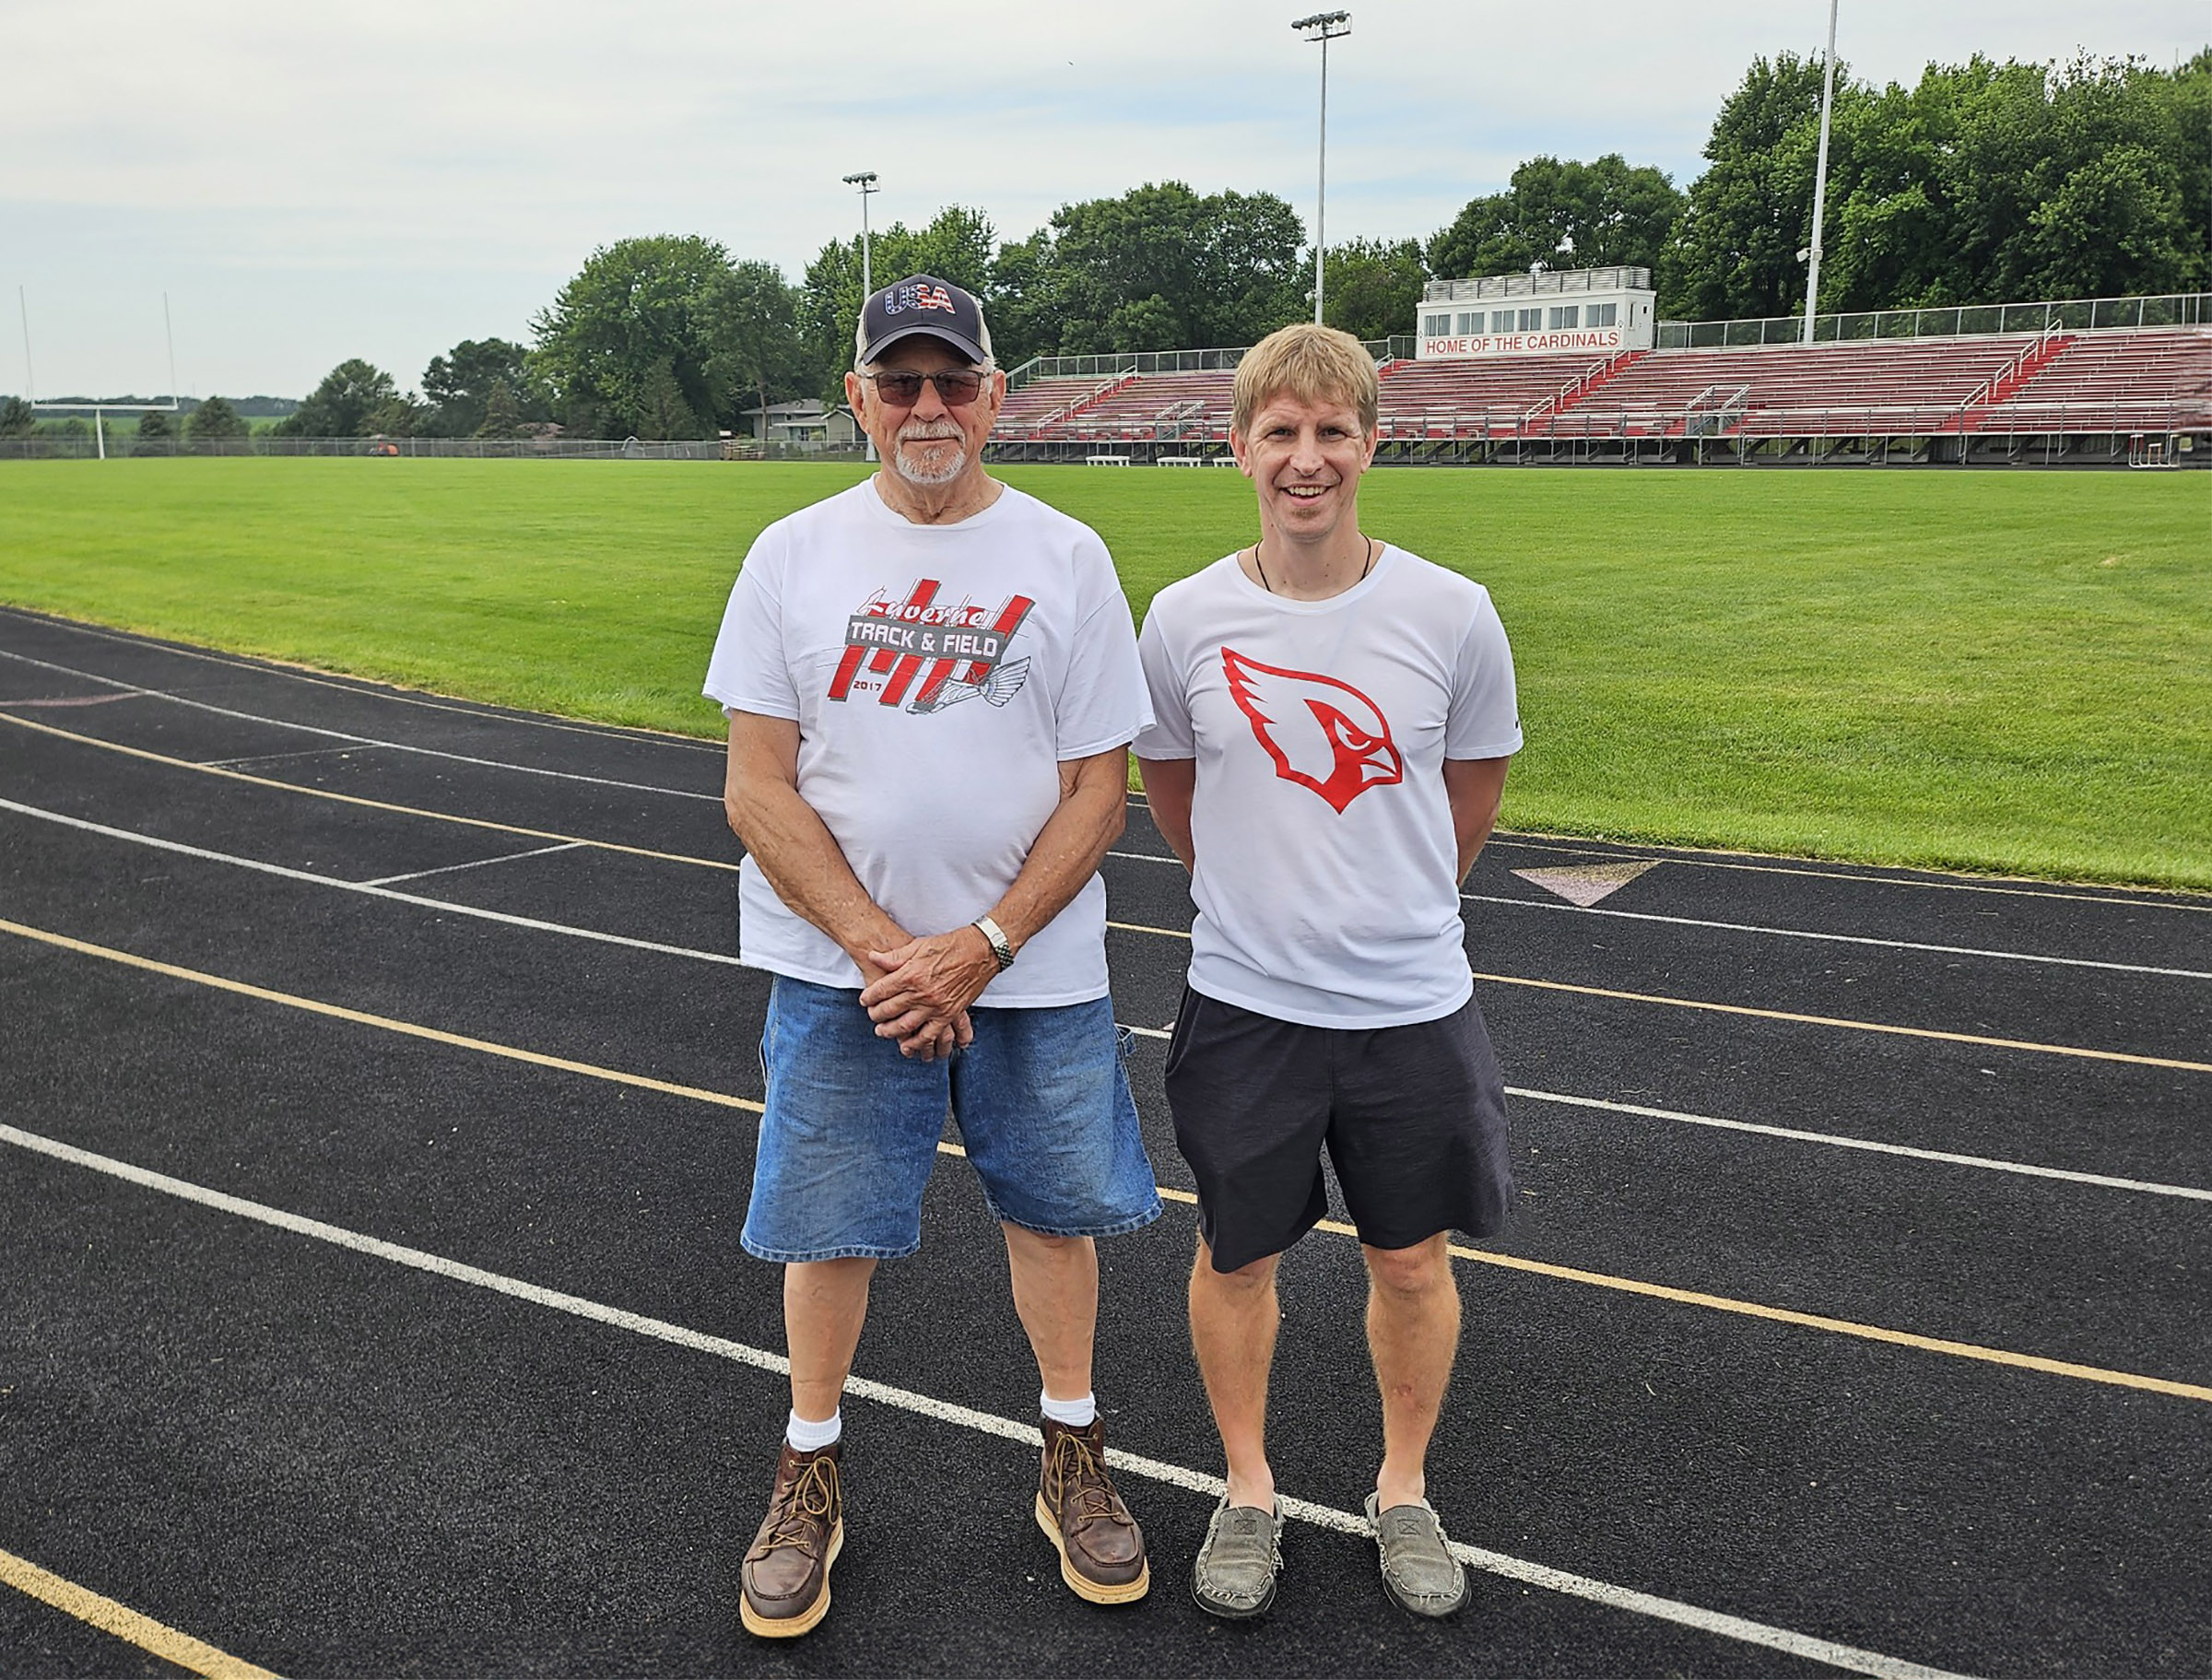 Al Stoakes and coach Pete Janiszeski recently received statewide honors. Stoakes was named Minnesota Class A Track and Field Volunteer of the Year. Janiszeski is the Minnesota Class A Girls Track and Field Head Coach of the Year. Jason Berghorst/Rock County Star Herald Photo